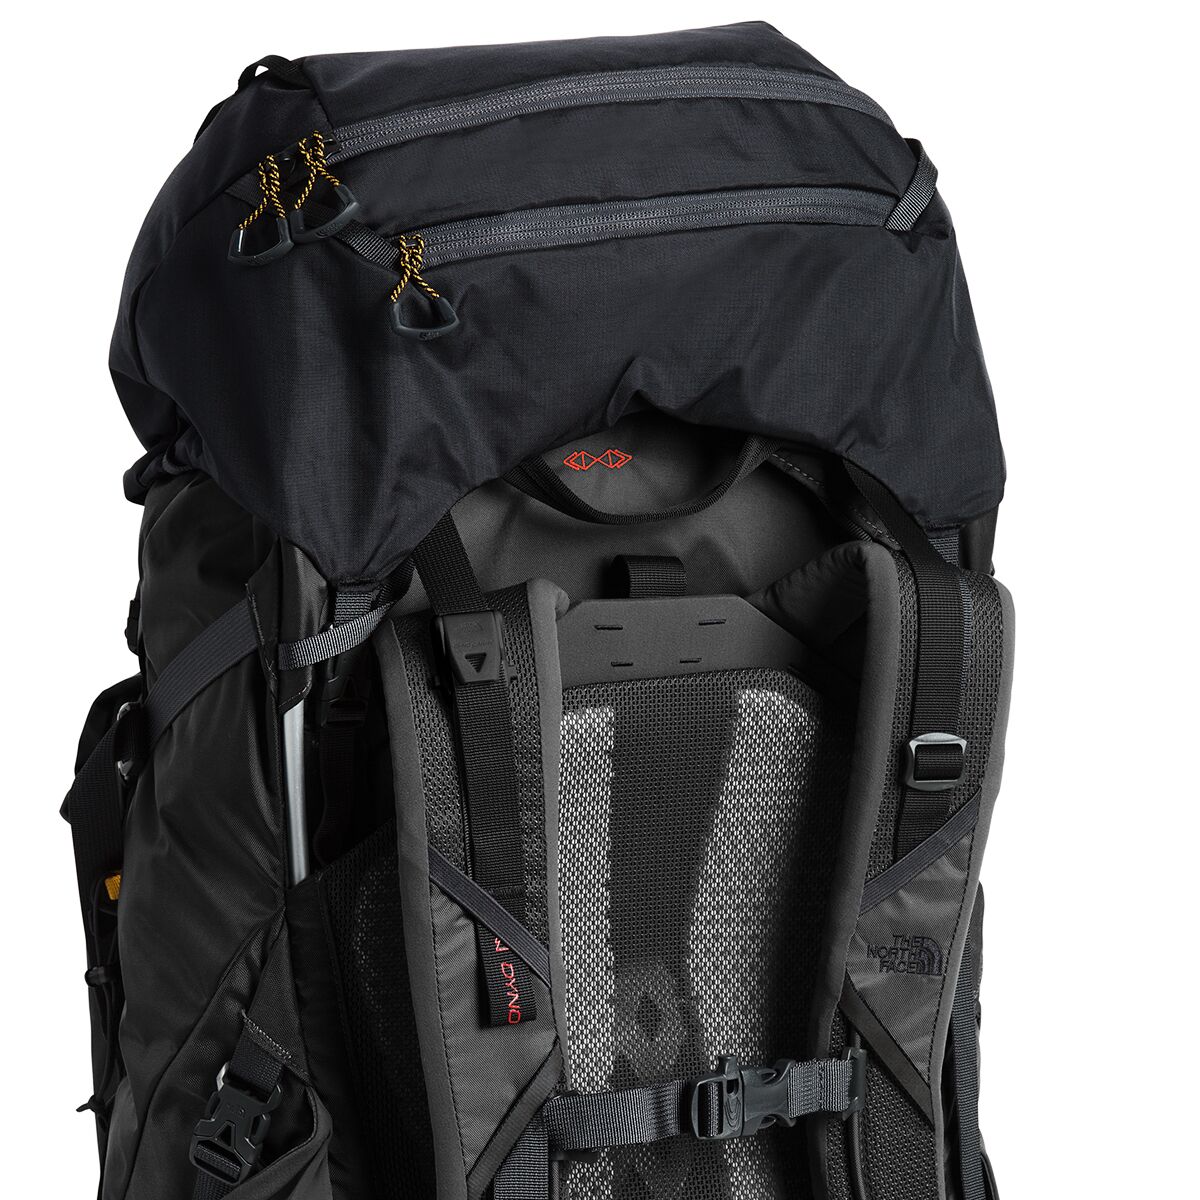 griffin 65 backpack review